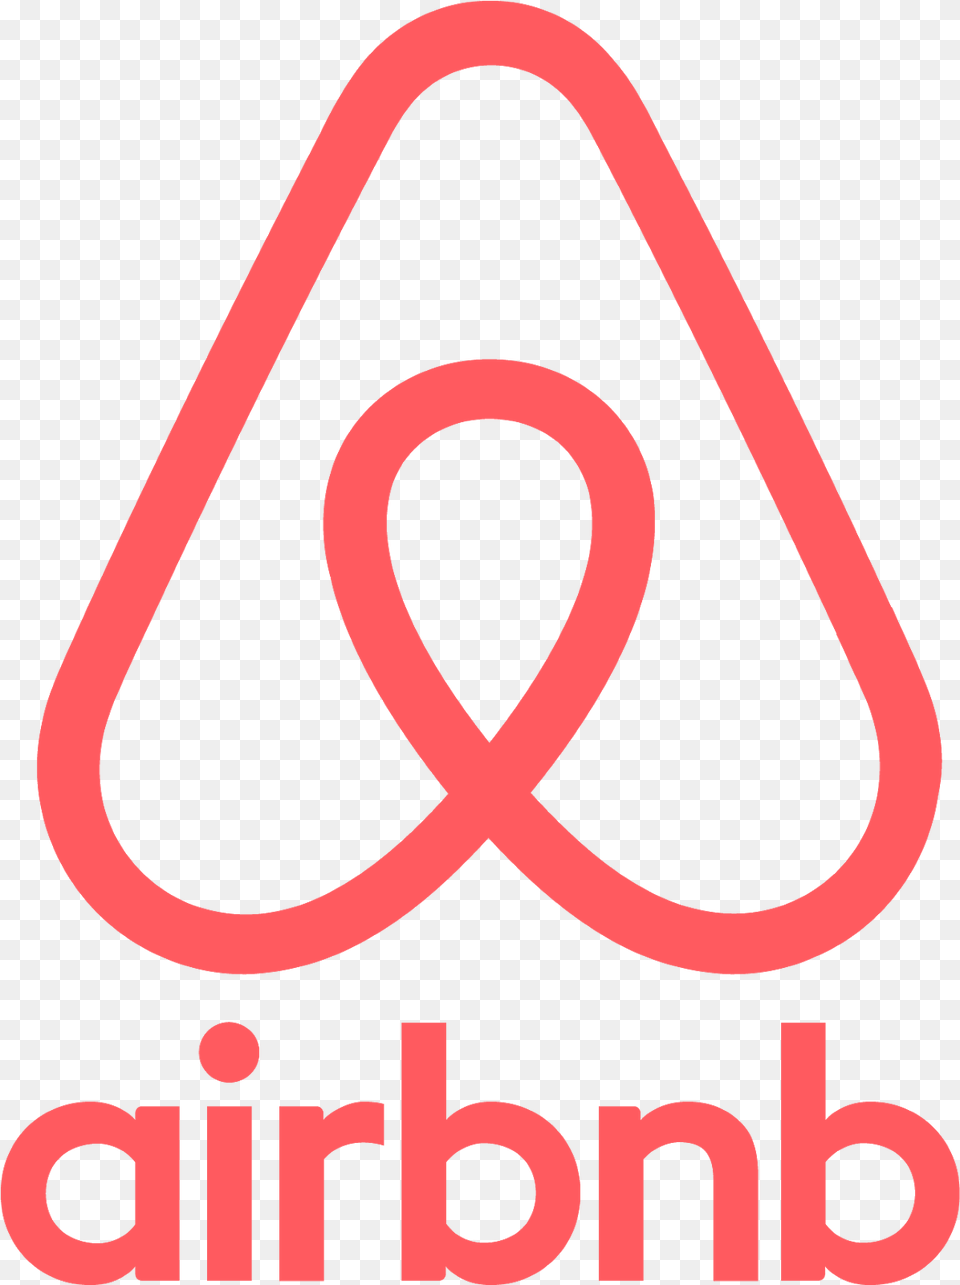 Download Logo Airbnb Icon Svg Eps Psd Ai Vector Transparent Airbnb Logo, Symbol, Sign, Gas Pump, Machine Png